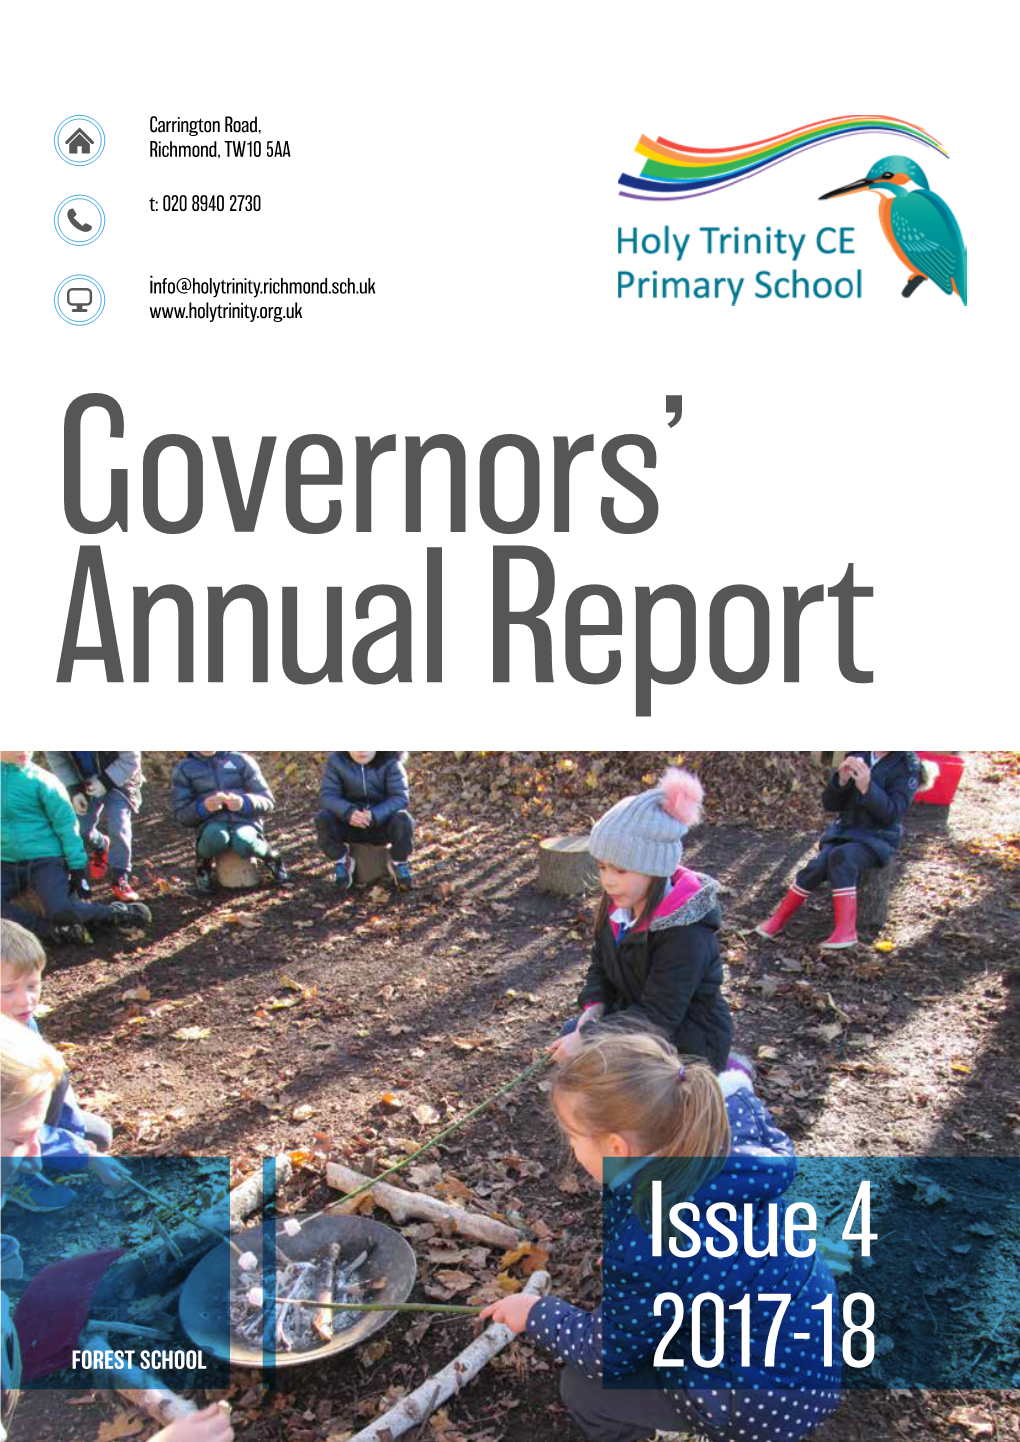 Governors' Annual Report